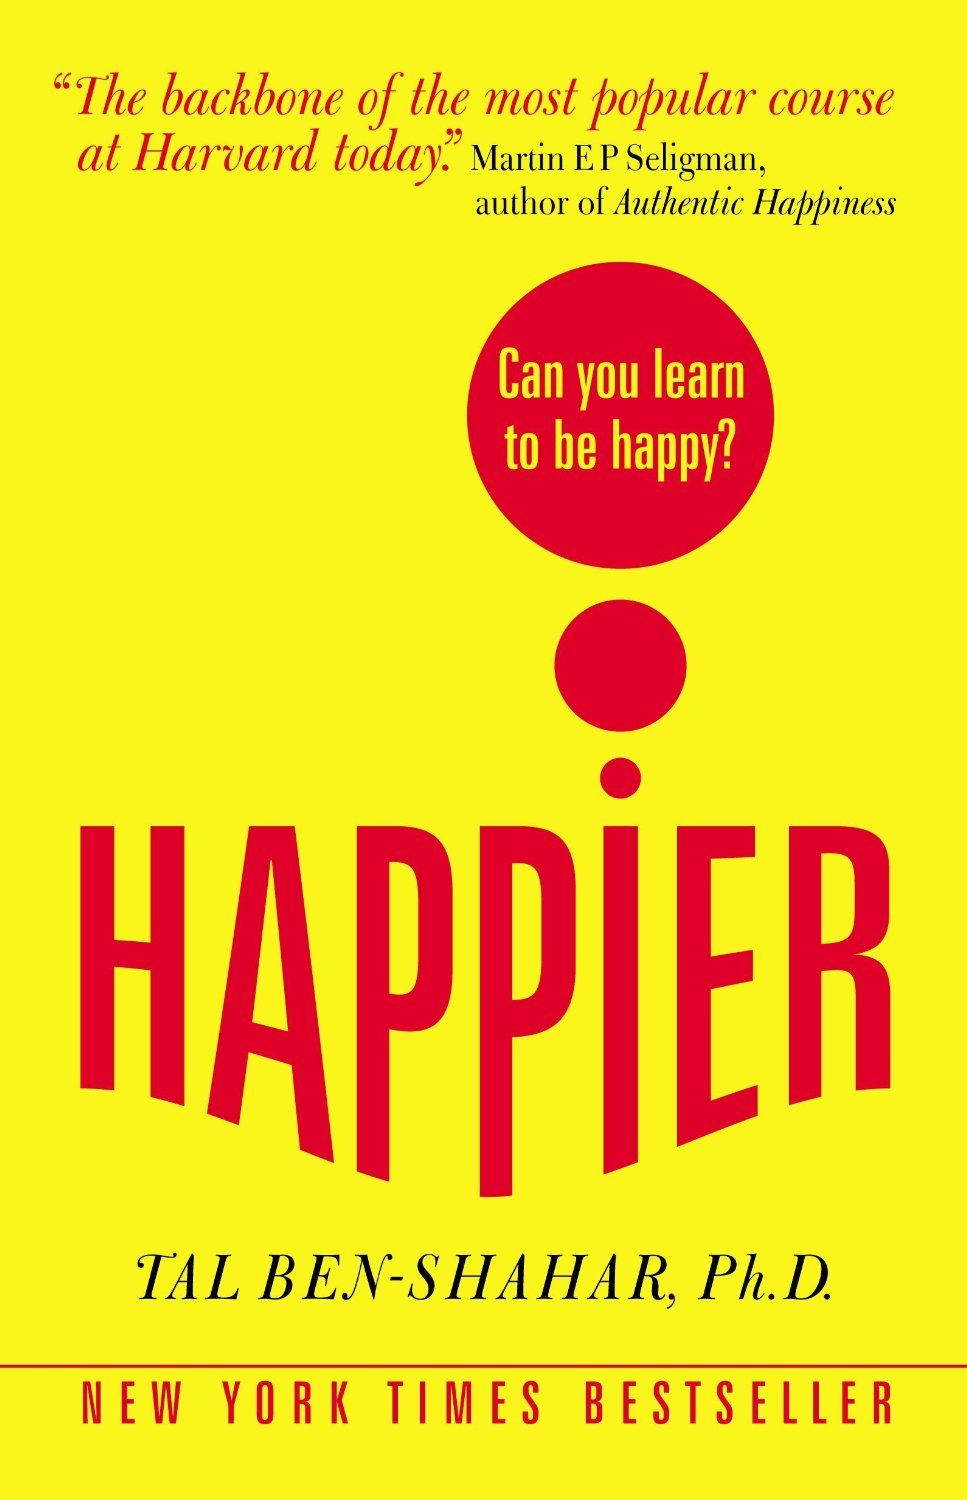 Positive Psychology book 5, Happier: Learn the Secrets to Daily Joy and Lasting Fulfilment - Tal Ben-Shaha